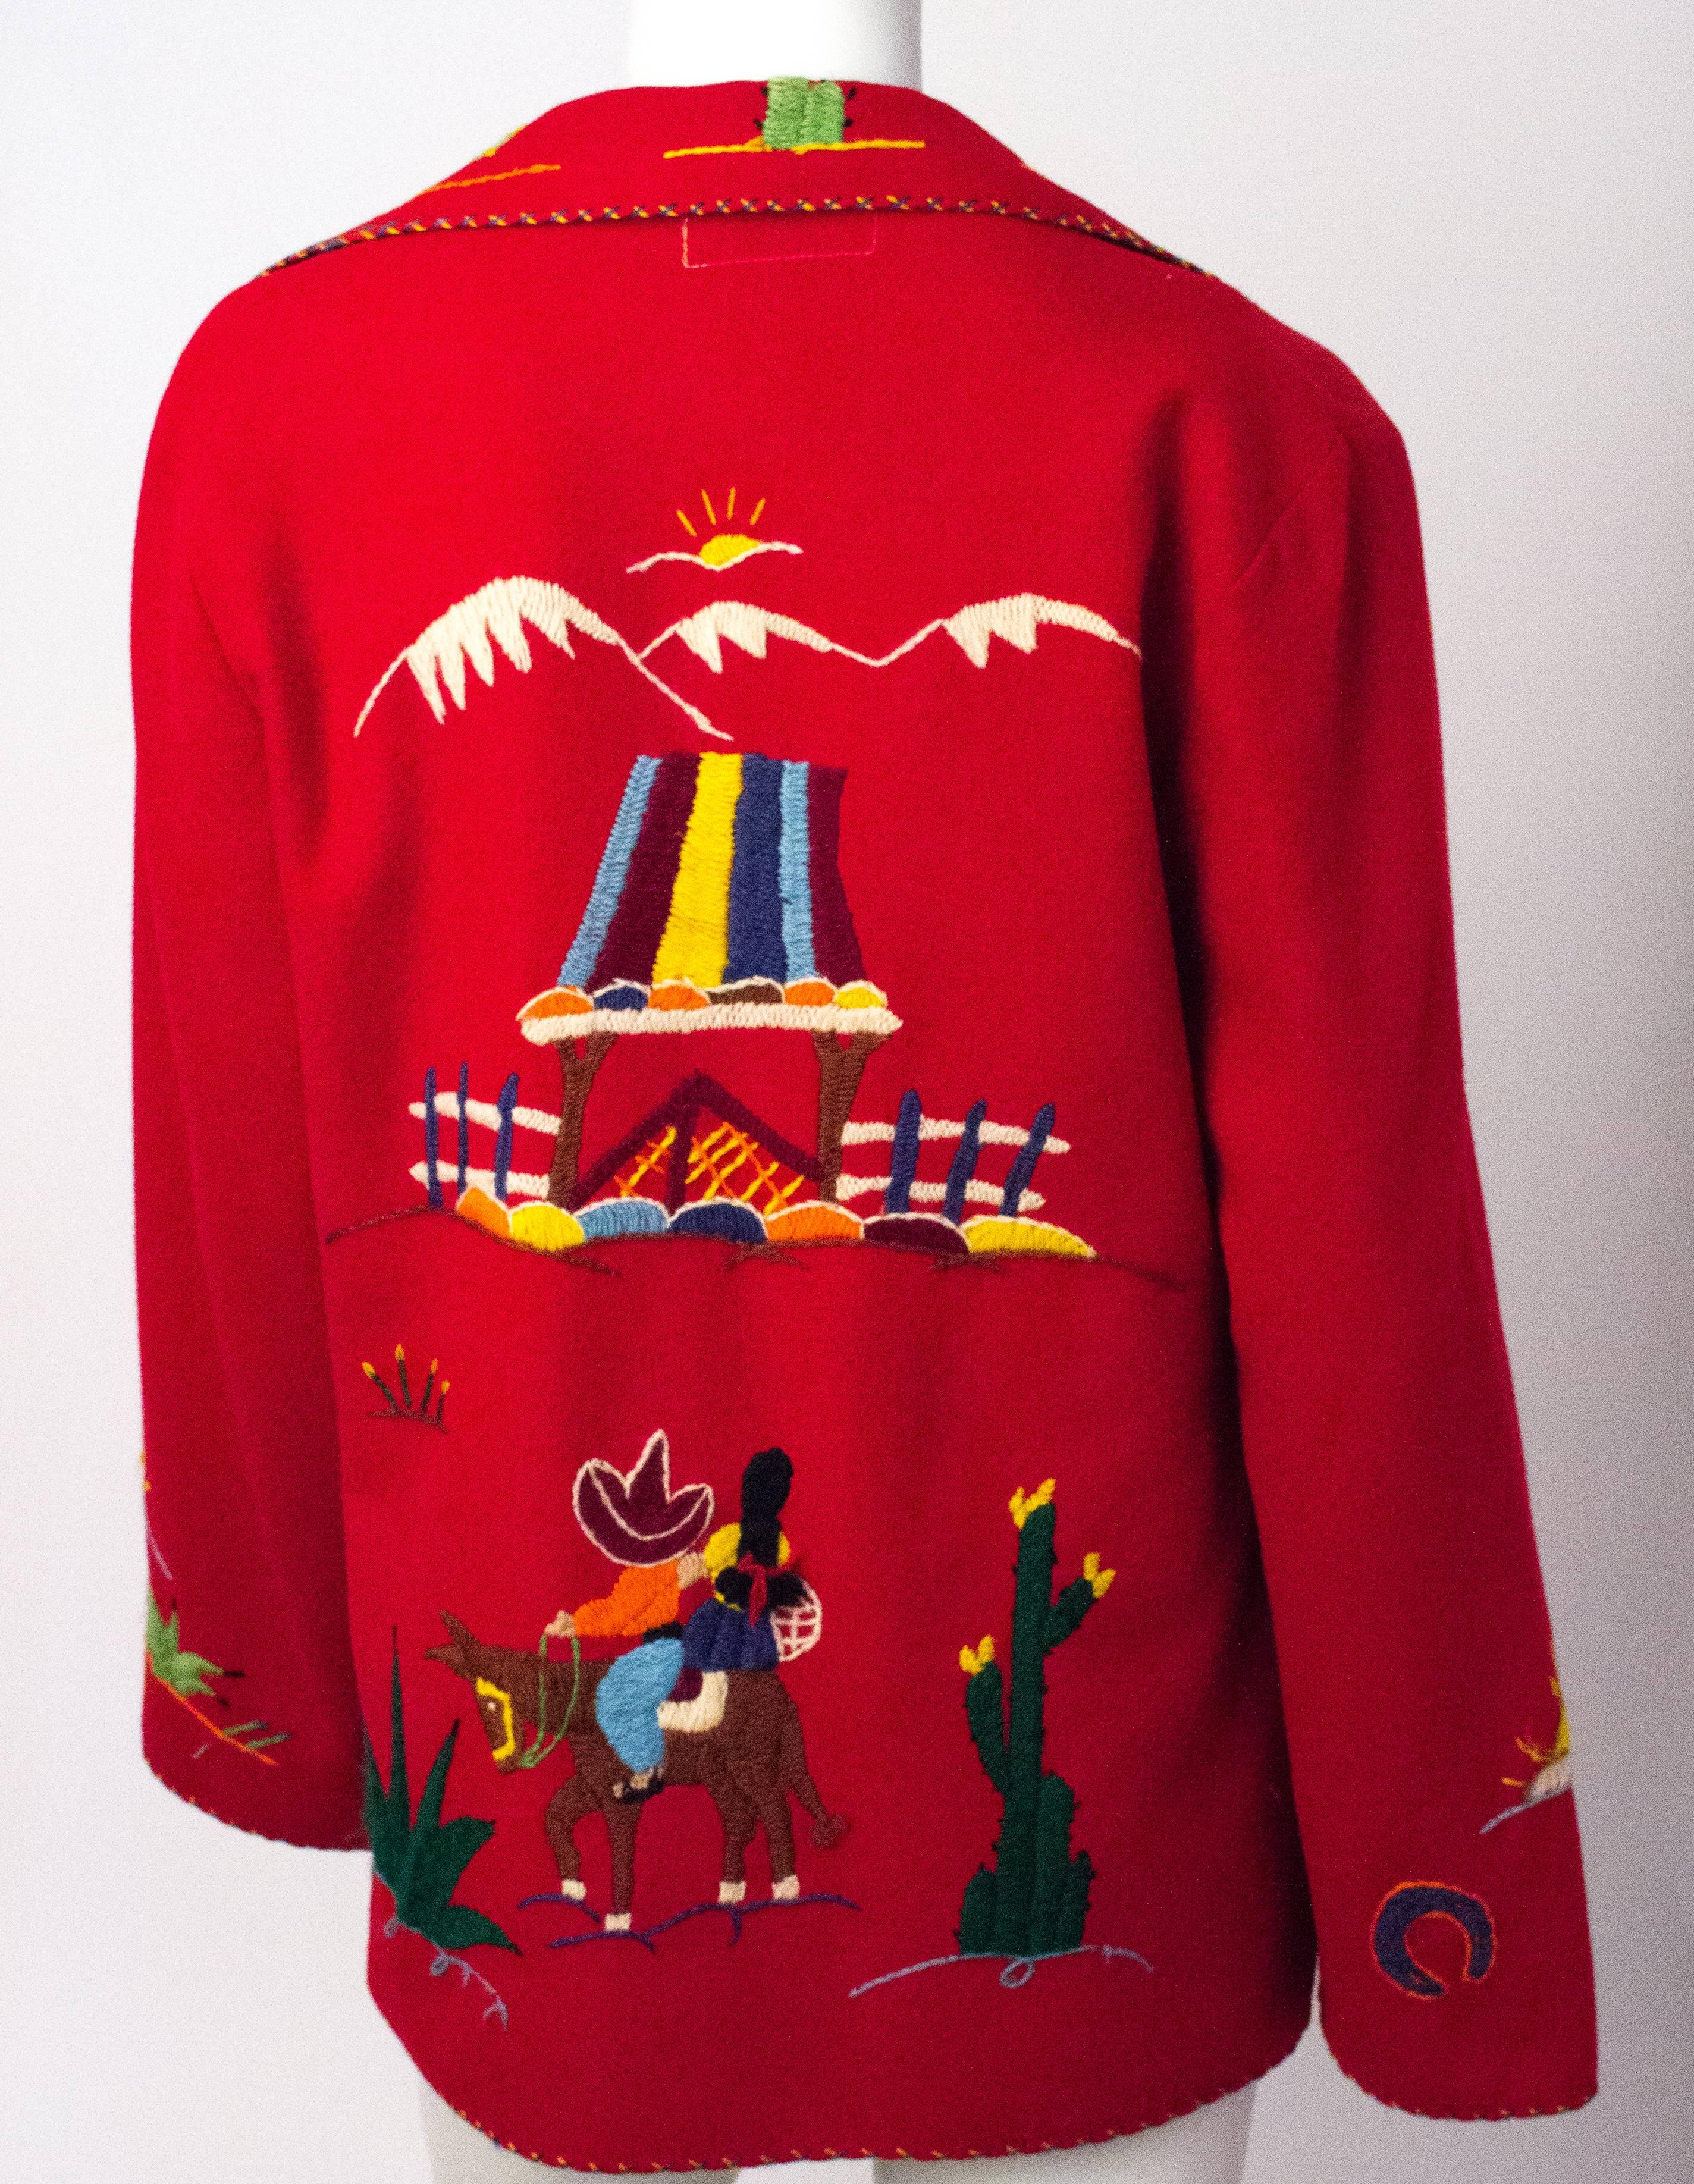 50s red wool embroidered souvenir jacket with scenes of cactus and mountains. 

